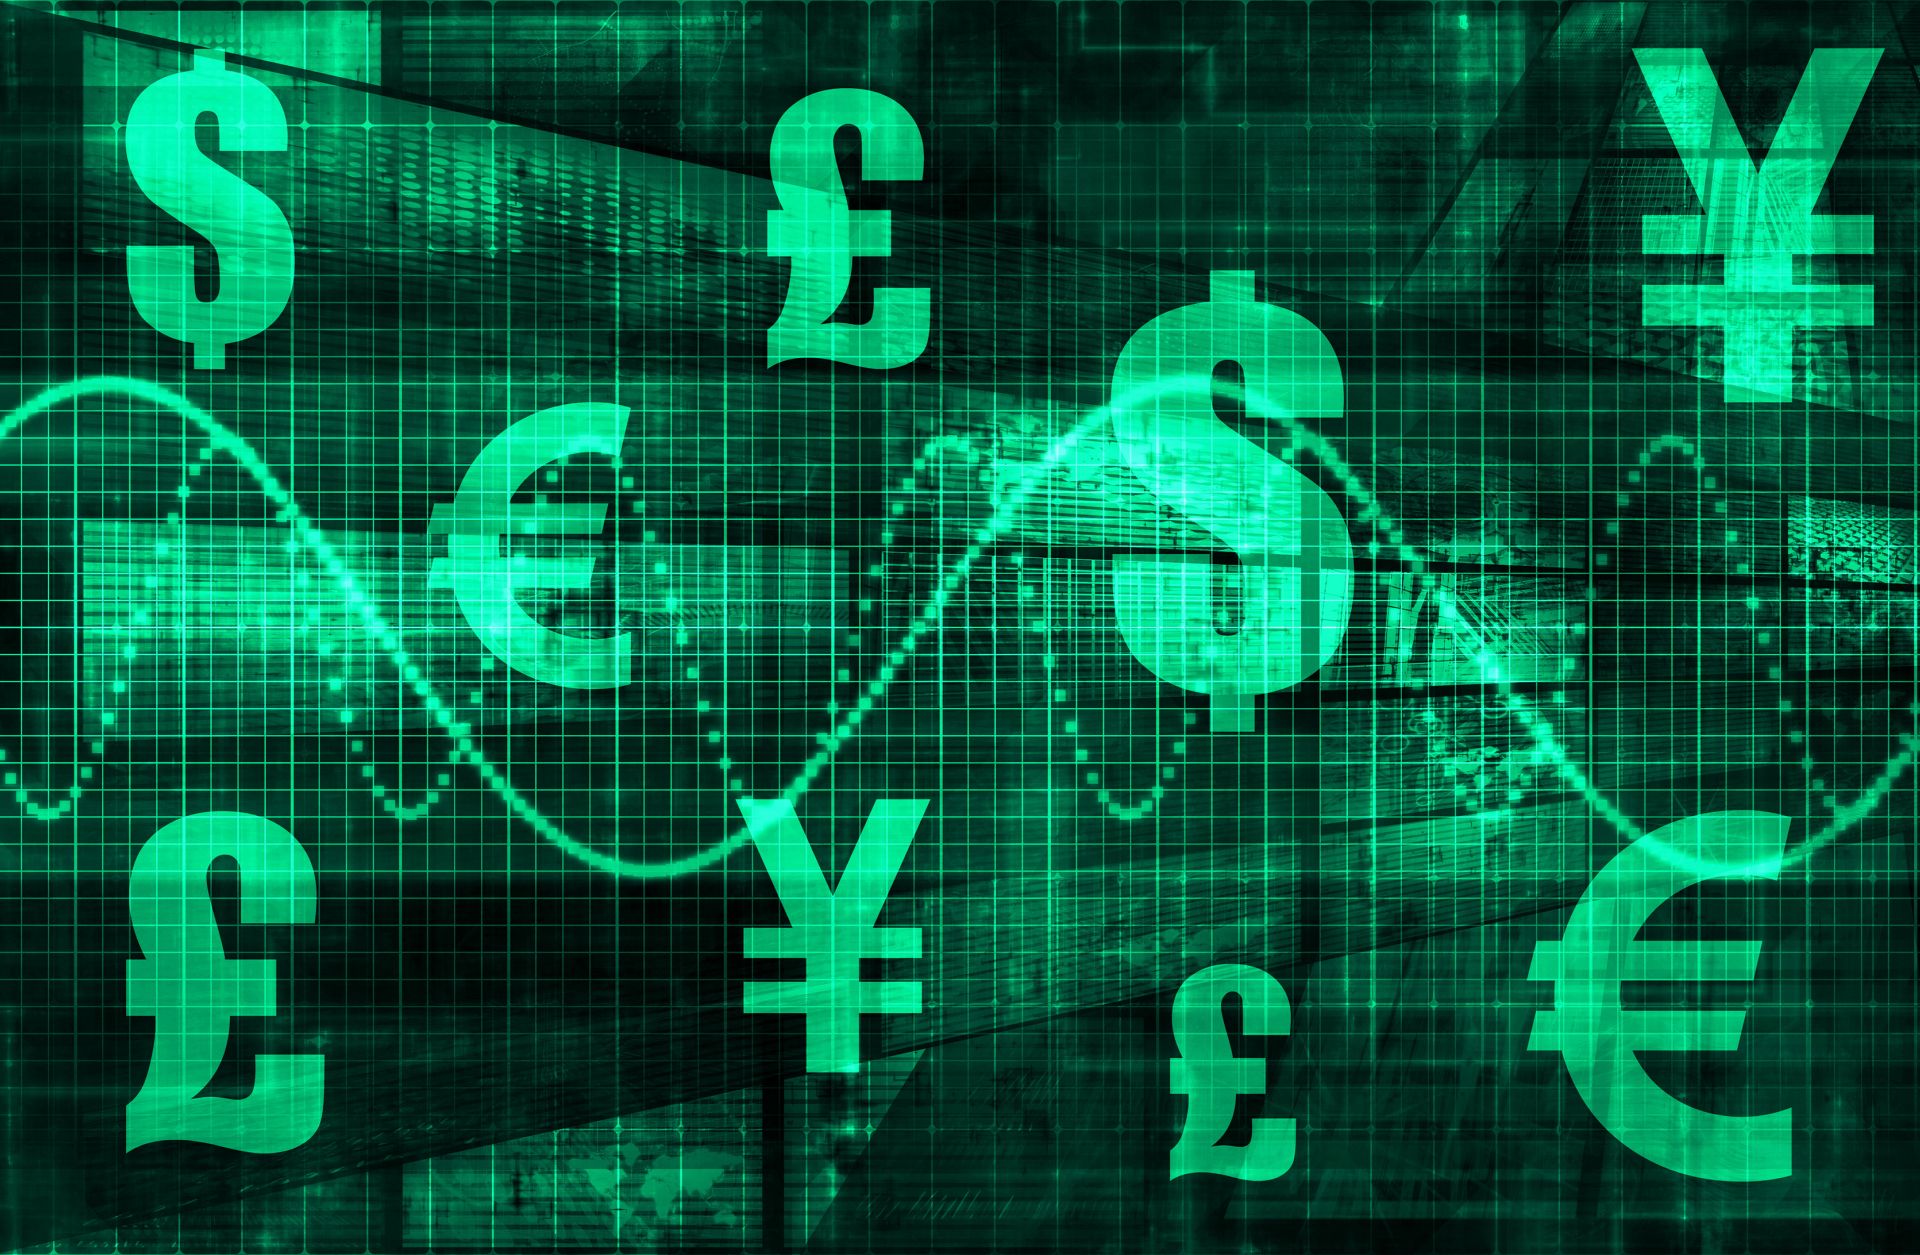 The symbols of various currencies are superimposed over a green background.